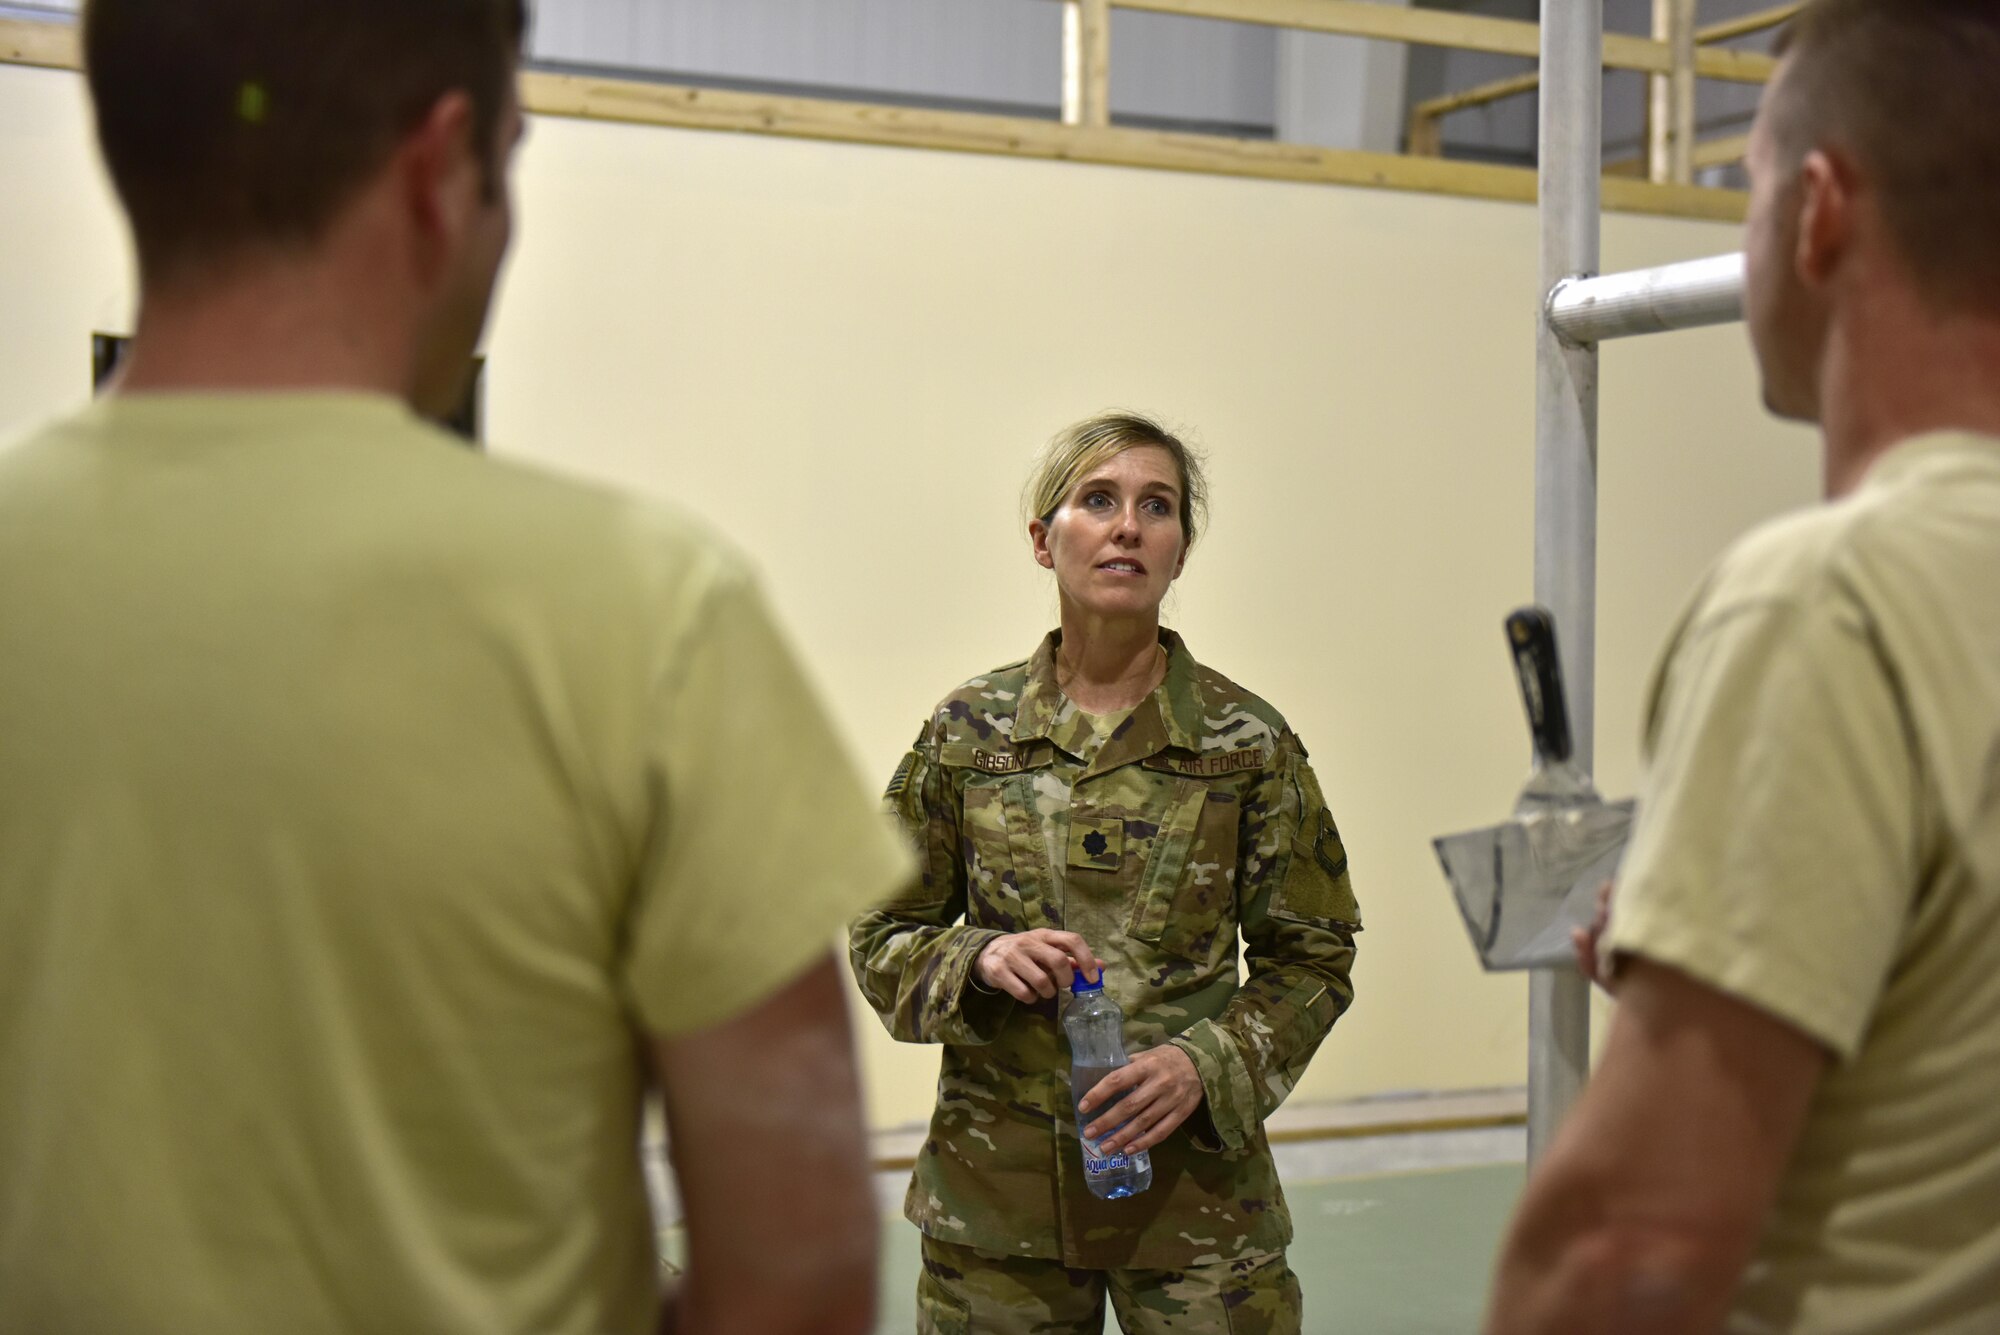 Lt. Col Heidi Gibson (middle), 407th Expeditionary Civil Engineer Squadron commander, discusses the progression of a construction project with Tech. Sgt. Mark Ricketts, 407th ECES structures assistant NCO in charge, and Staff Sgt. Troy Schneider, structural craftsman, June 7, 2017, at the 407th Air Expeditionary Group in Southwest Asia. Gibson administers to more than 260 Total Force Airmen. Their objectives are to sustain the base infrastructure and to initiate actions for future contingencies.(U.S. Air force photo by Senior Airman Ramon A. Adelan)